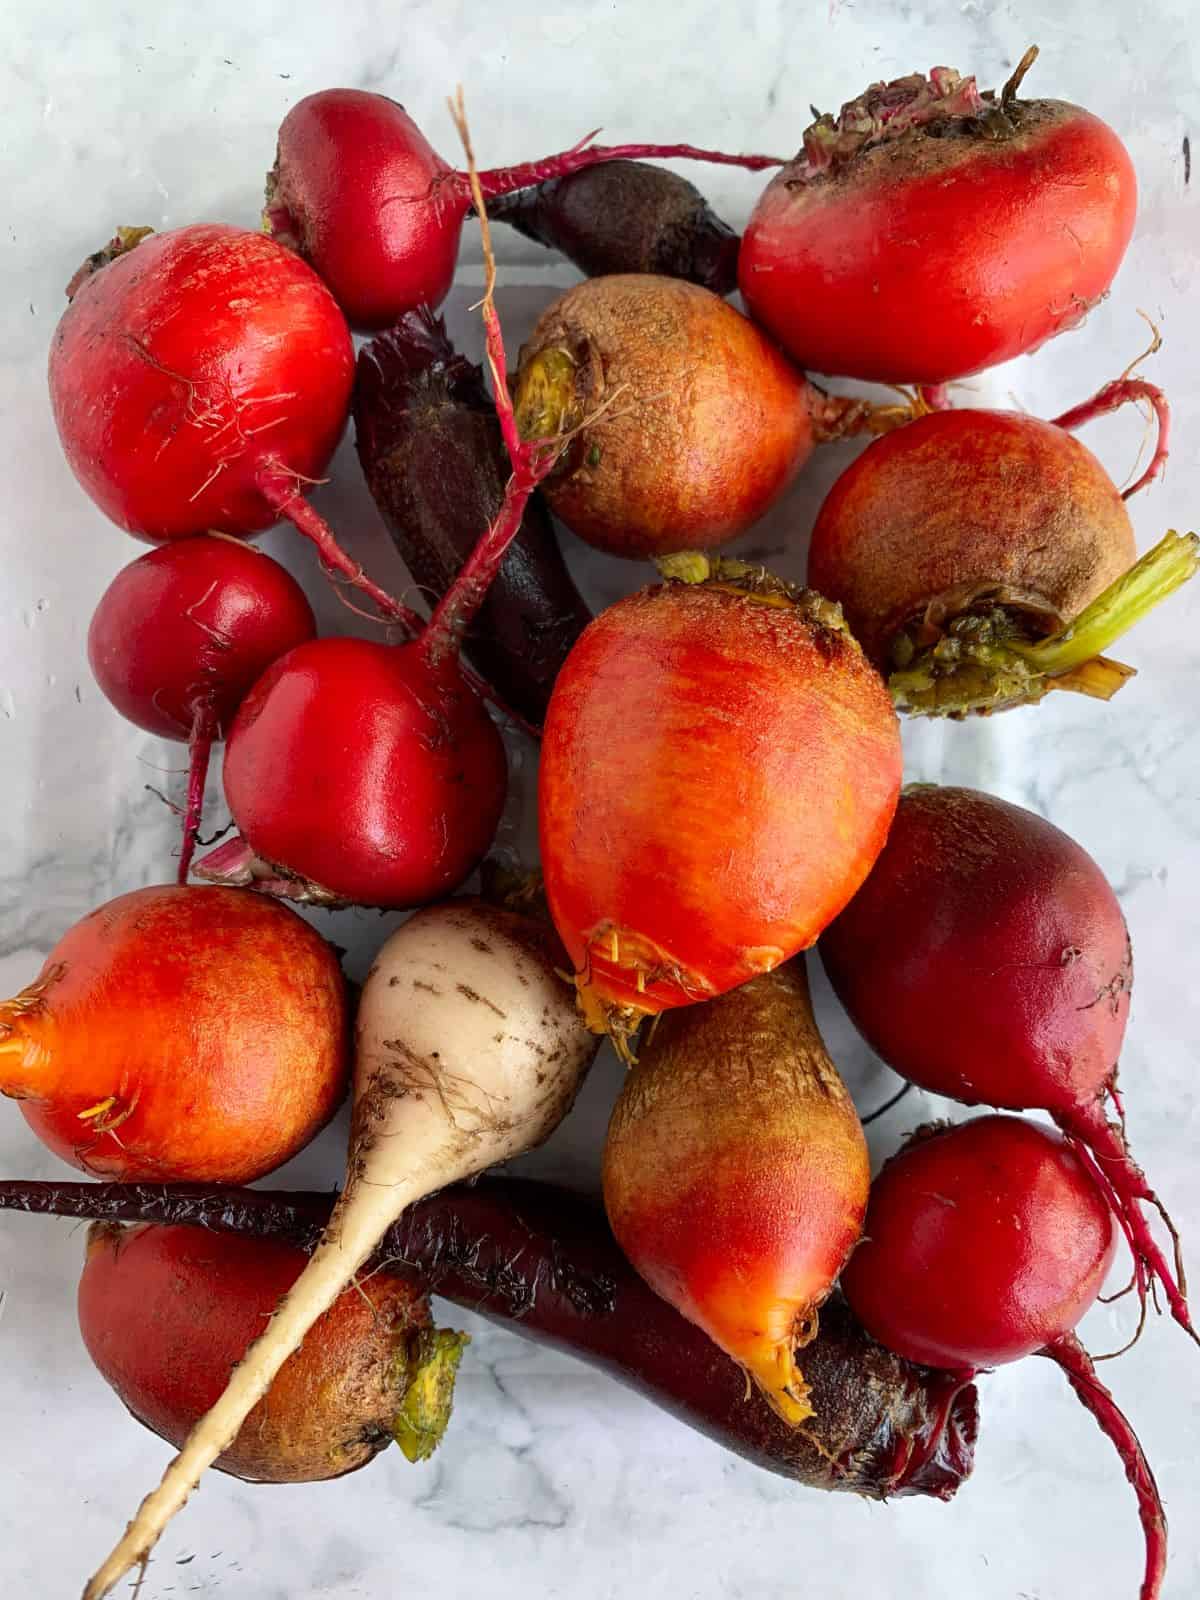 washed beets, ready to boil